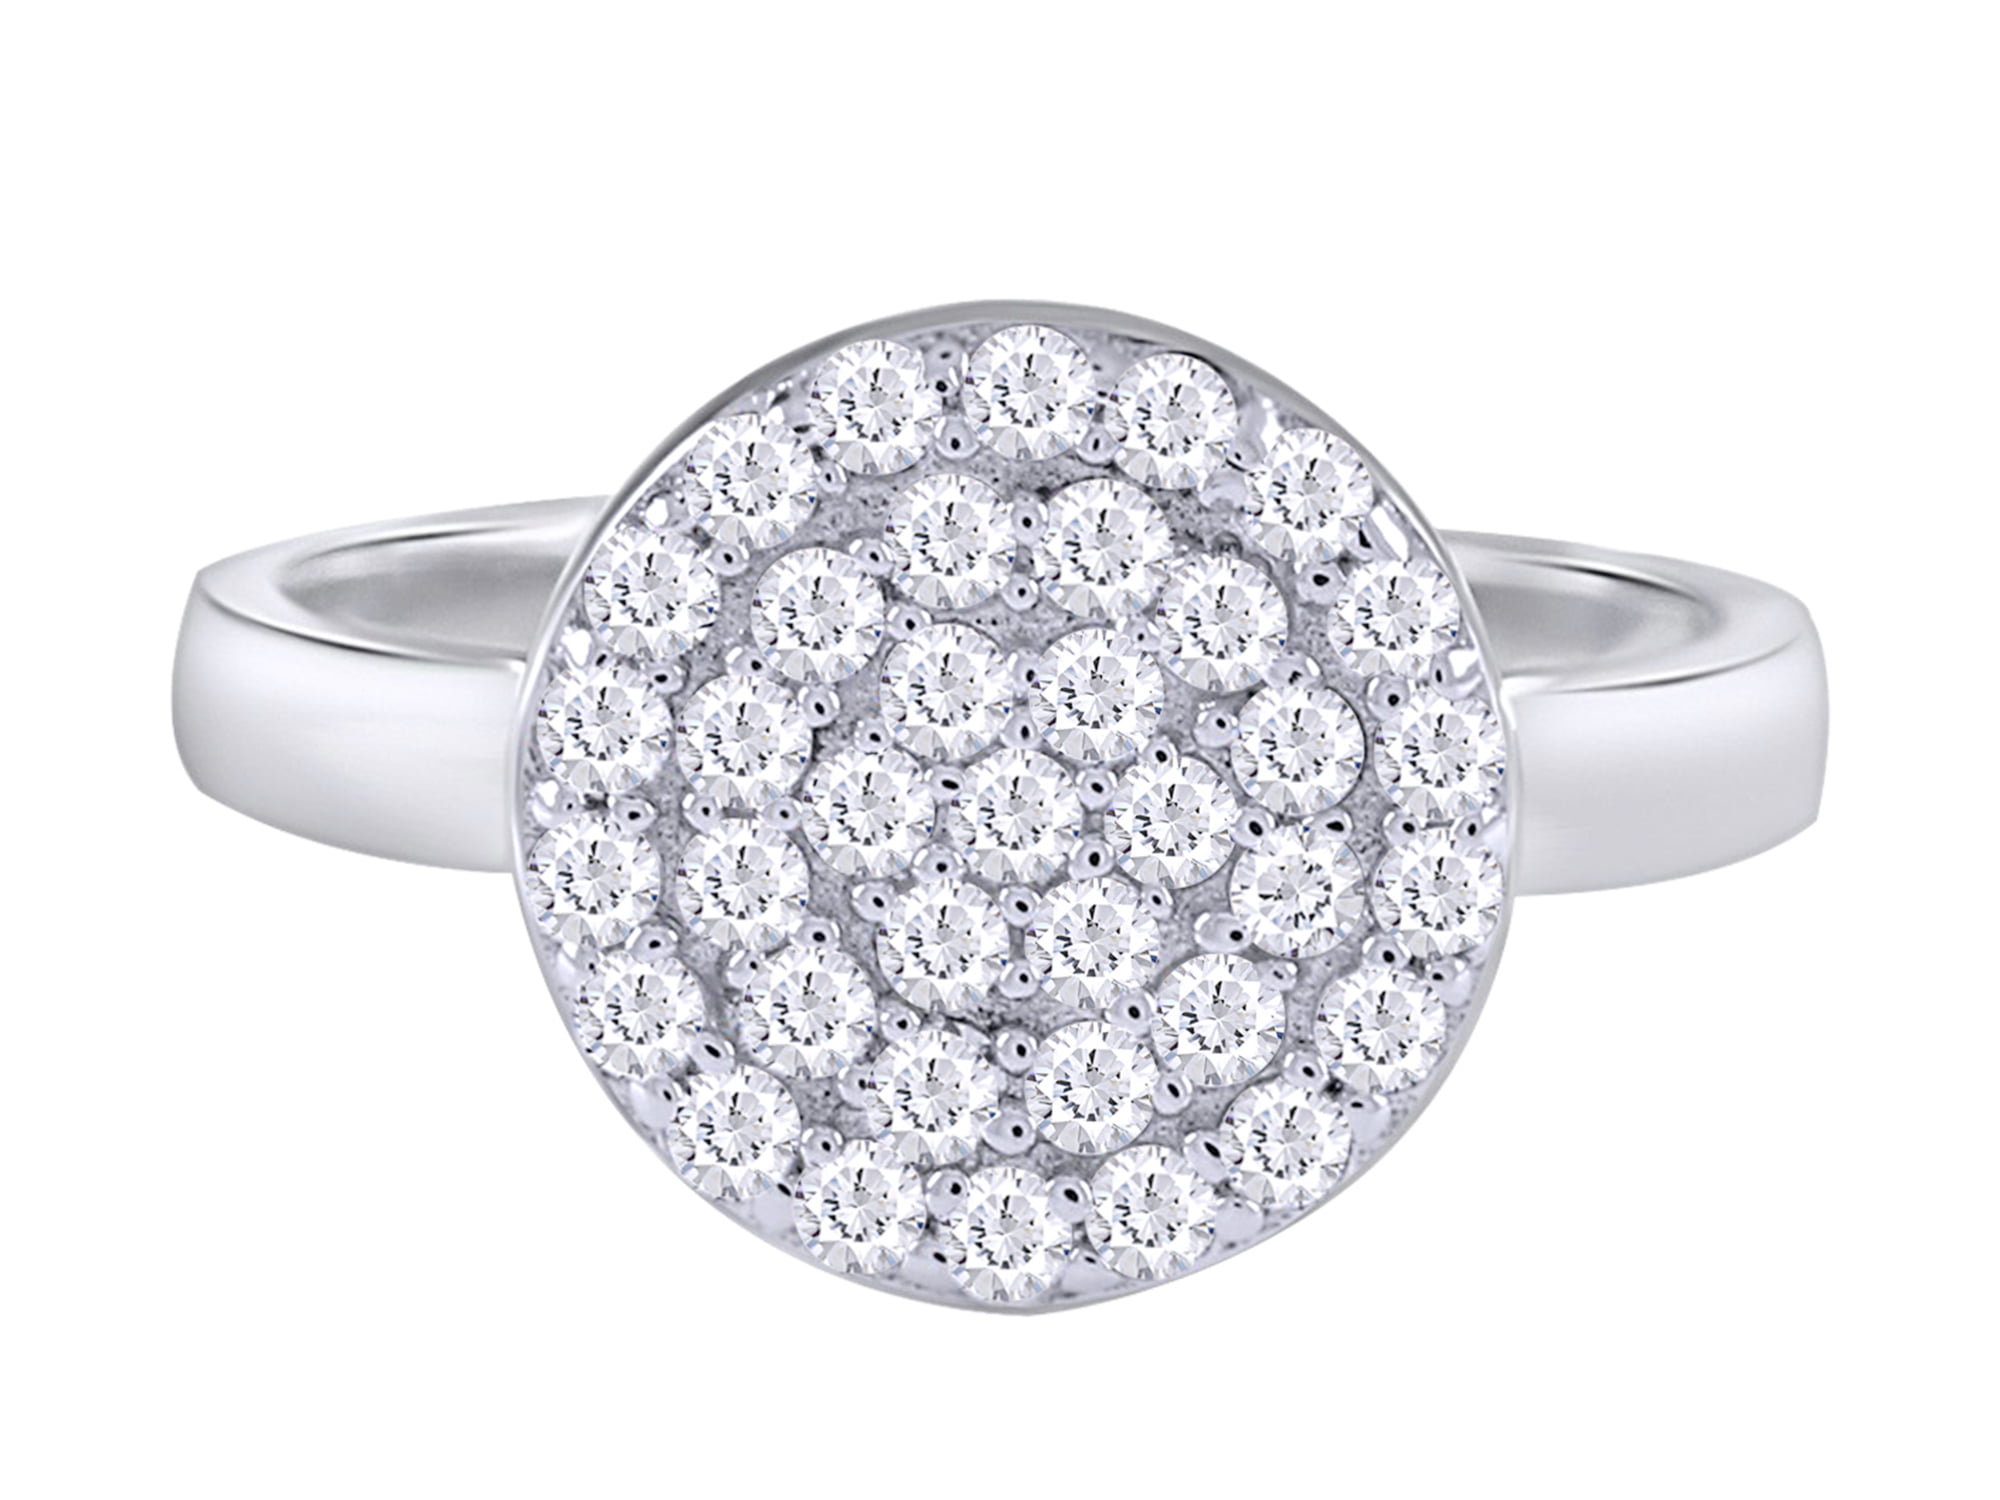 Wishrocks Round Cut White Cubic Zirconia Engagement Ring in 14K Yellow Gold Over Sterling Silver 